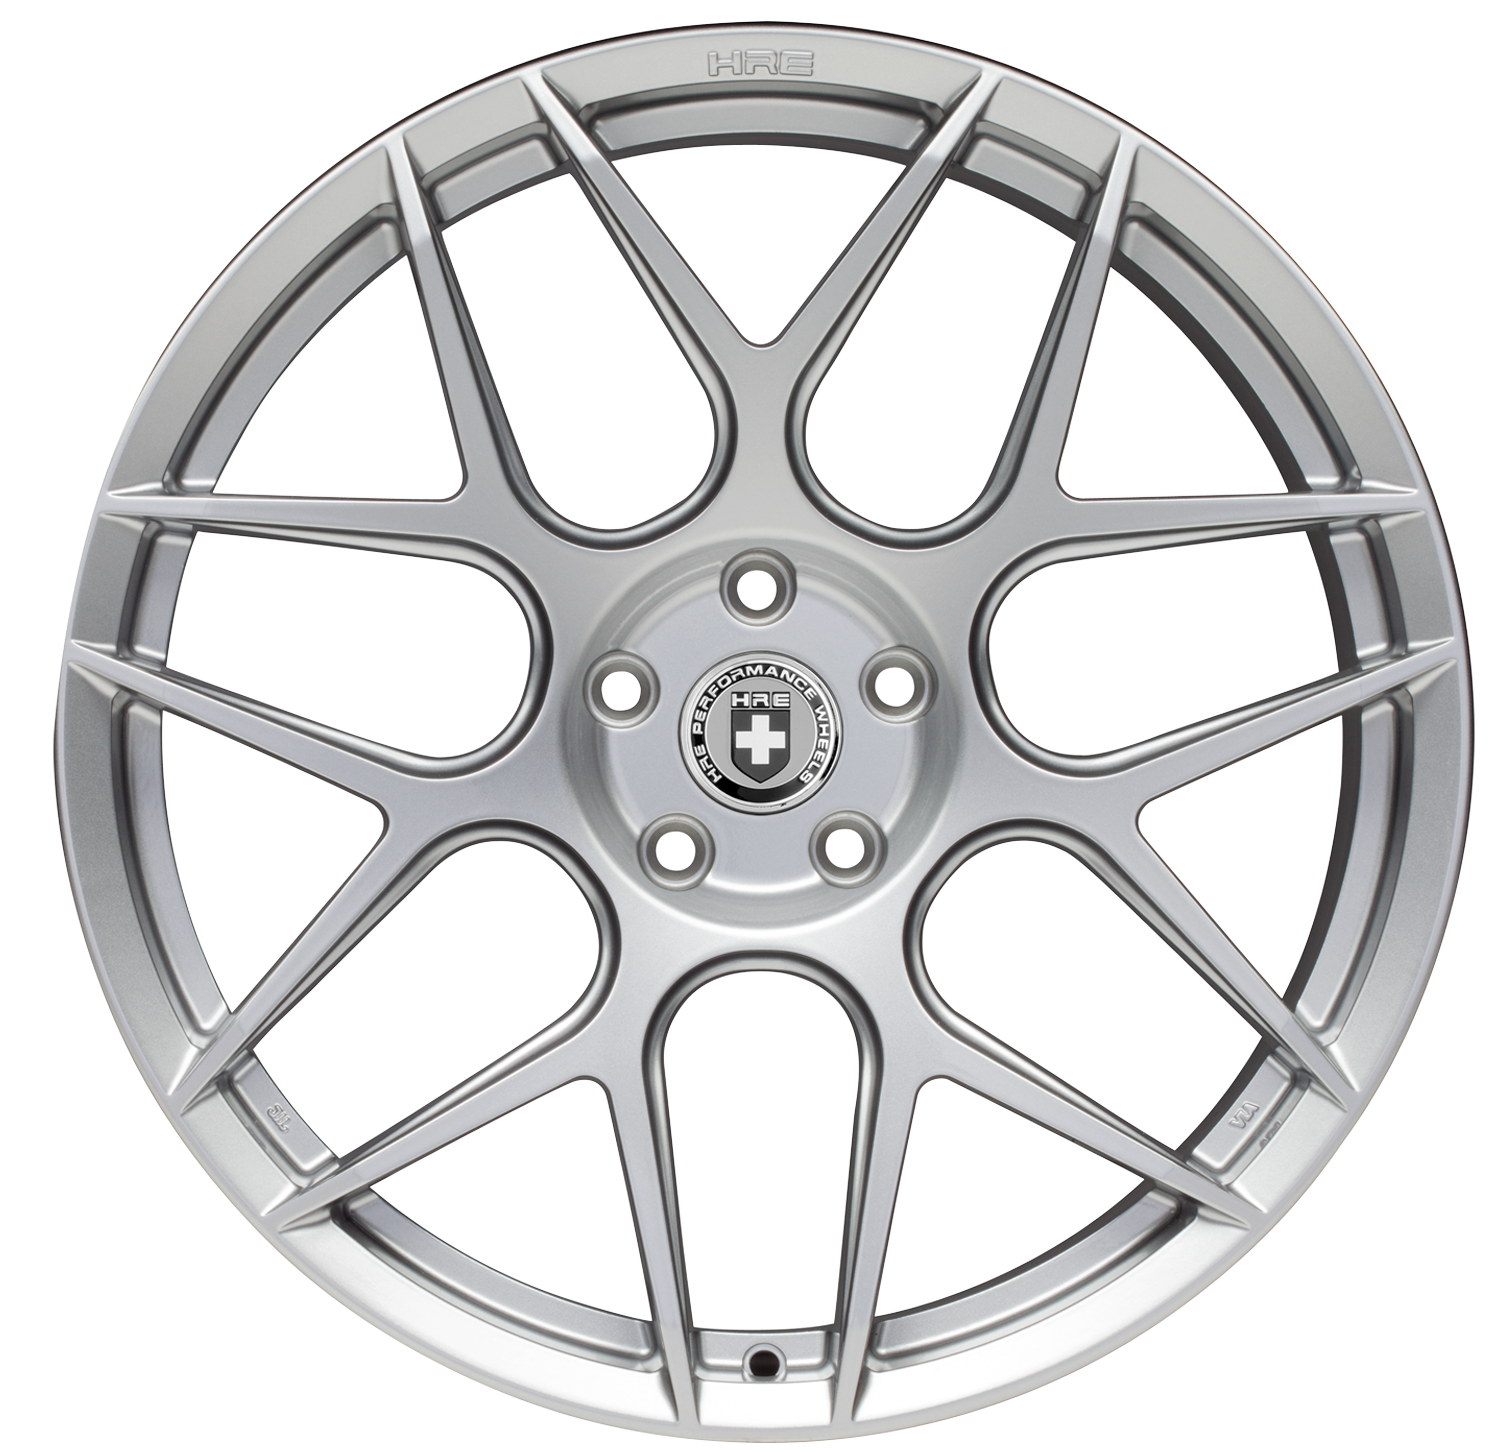 Alloy Wheel PNG HD Image